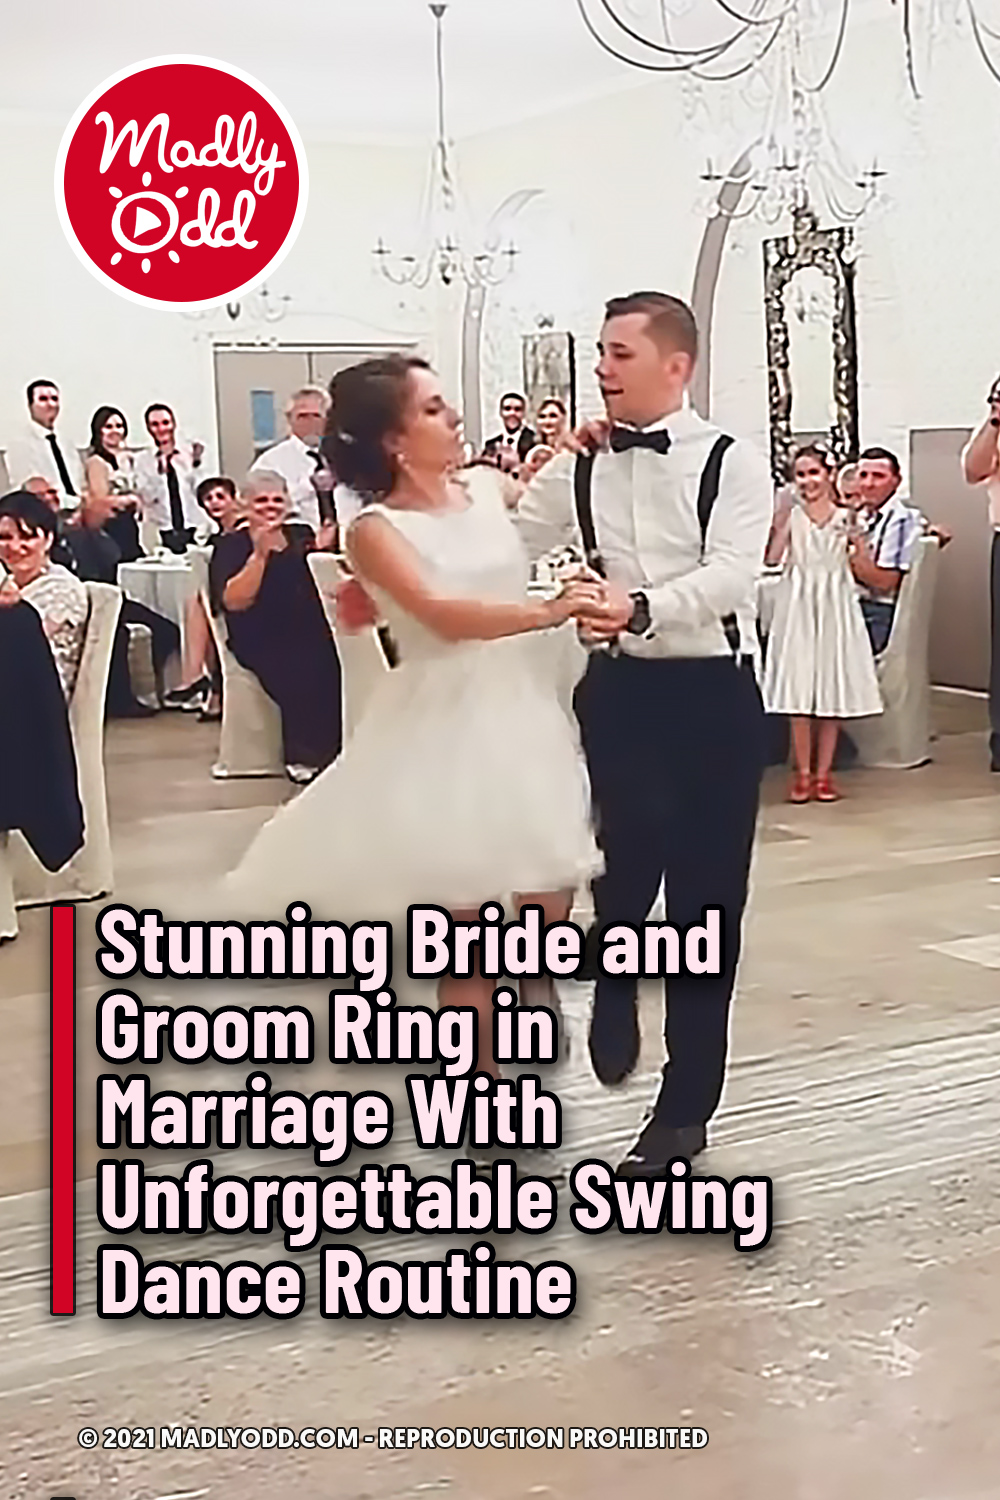 Stunning Bride and Groom Ring in Marriage With Unforgettable Swing Dance Routine